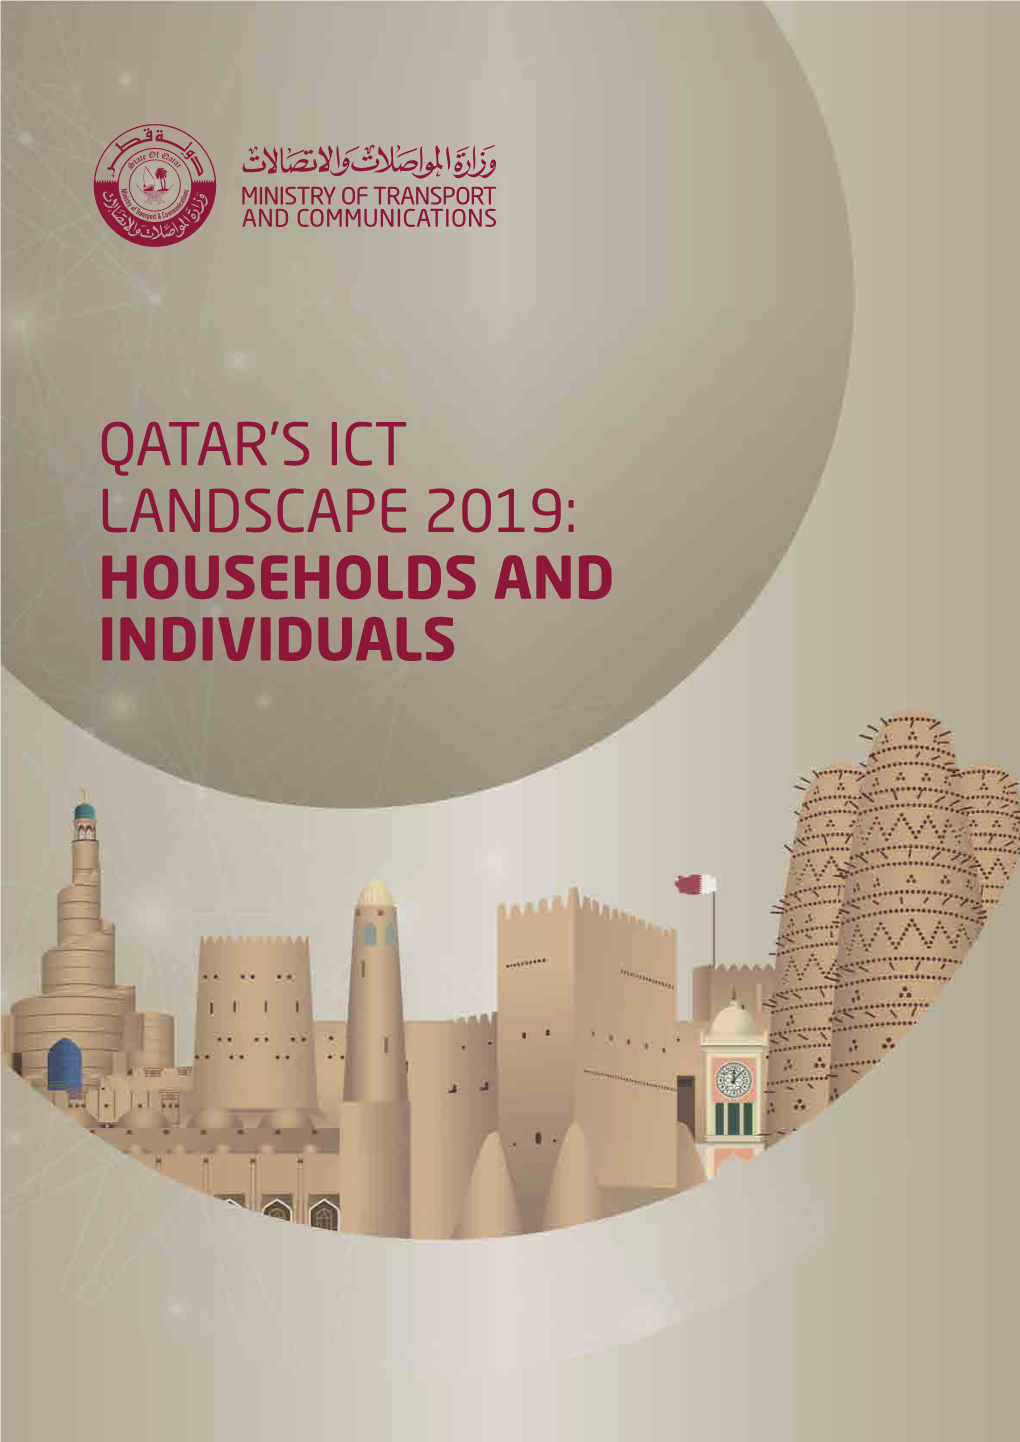 Qatar's Ict Landscape 2019: Households and Individuals